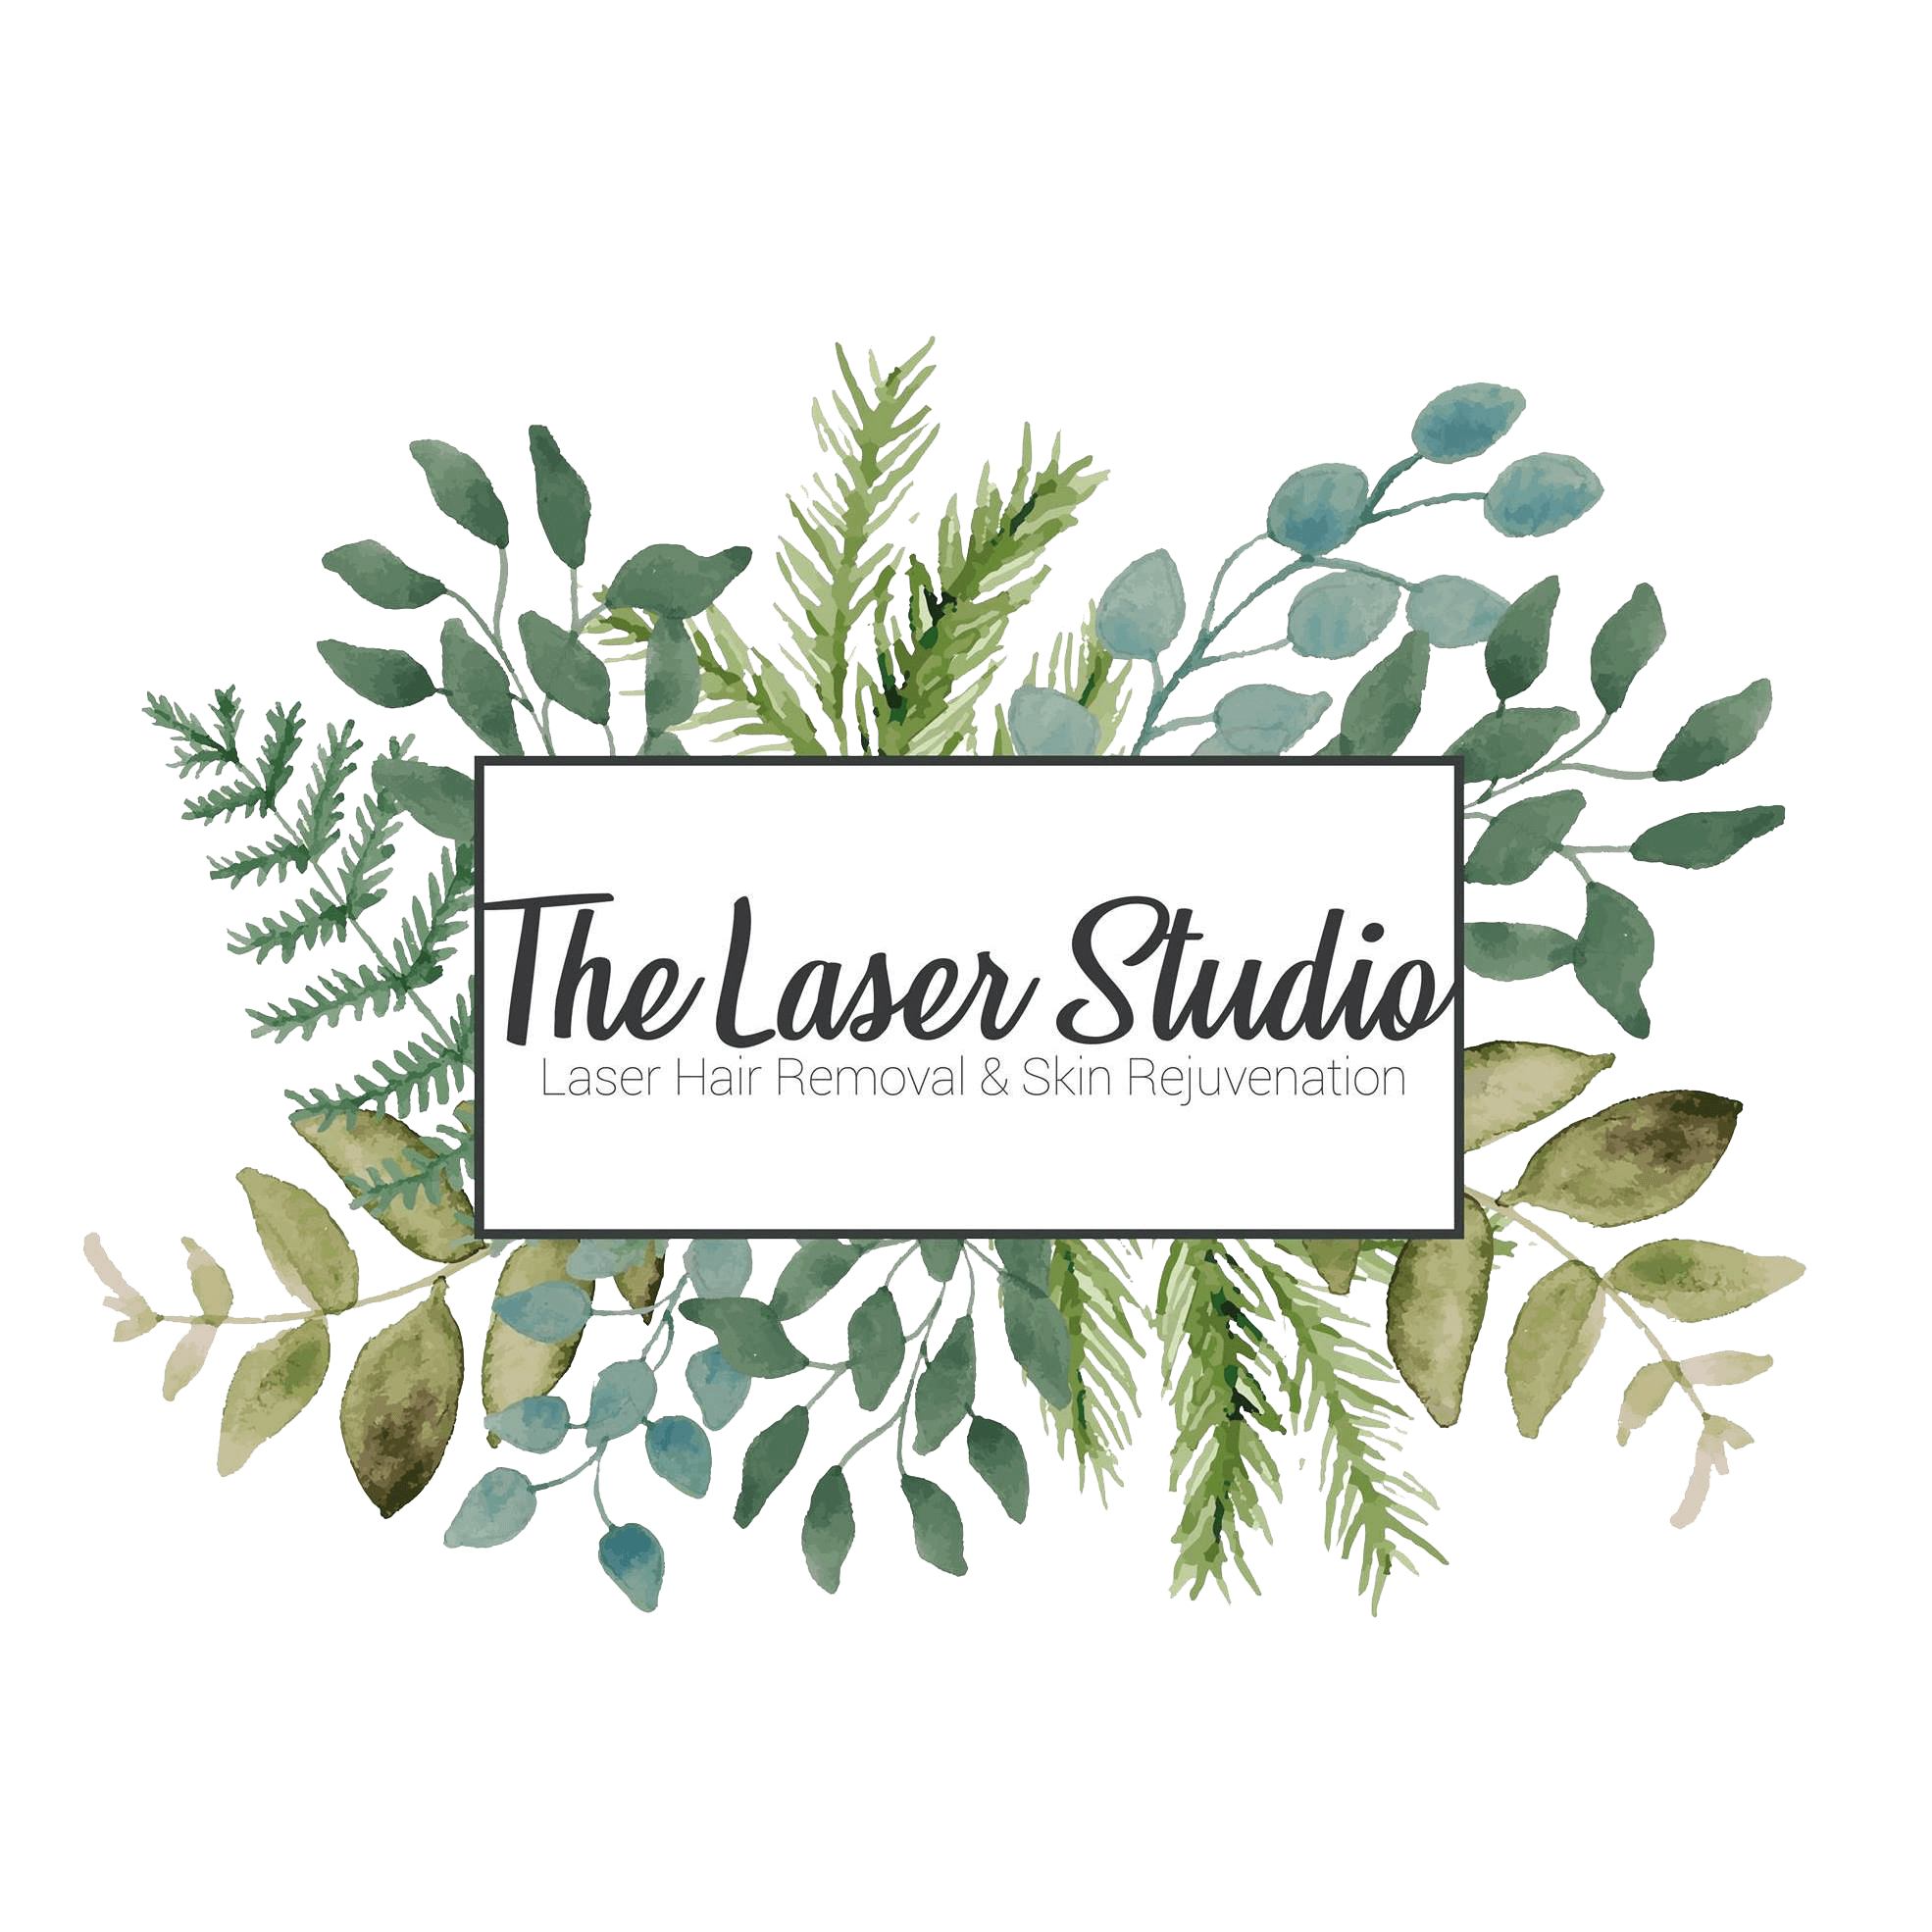 The official logo of The Laser Studio